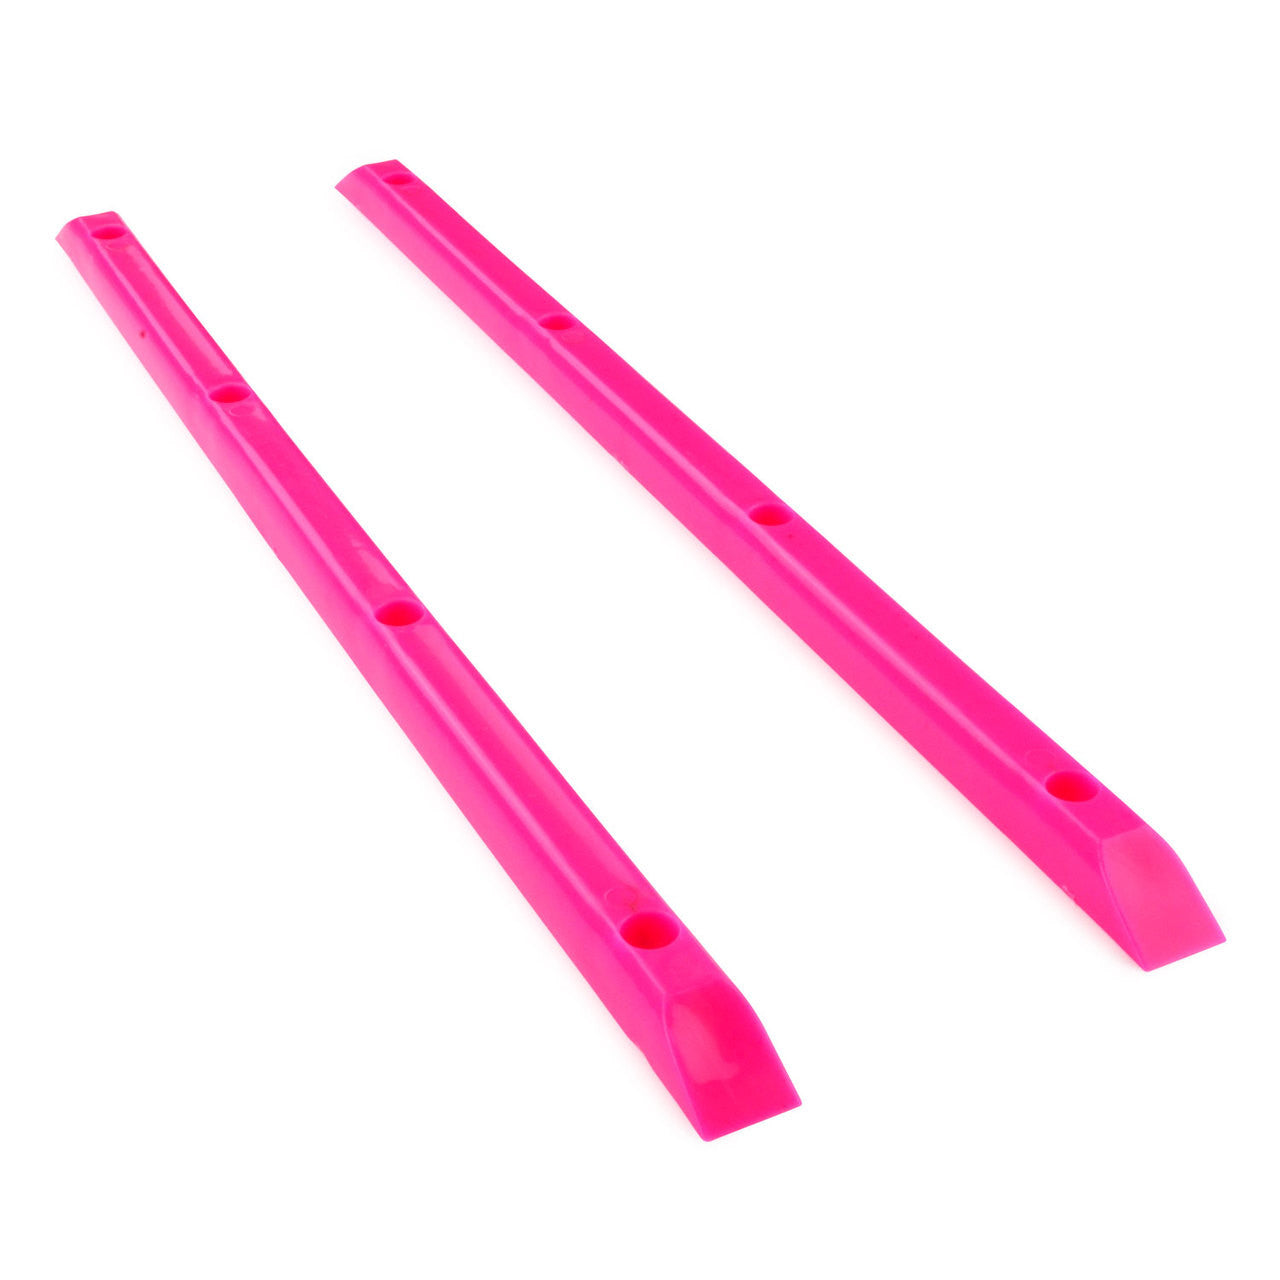 Yocaher Rails Ribs - Neon Pink